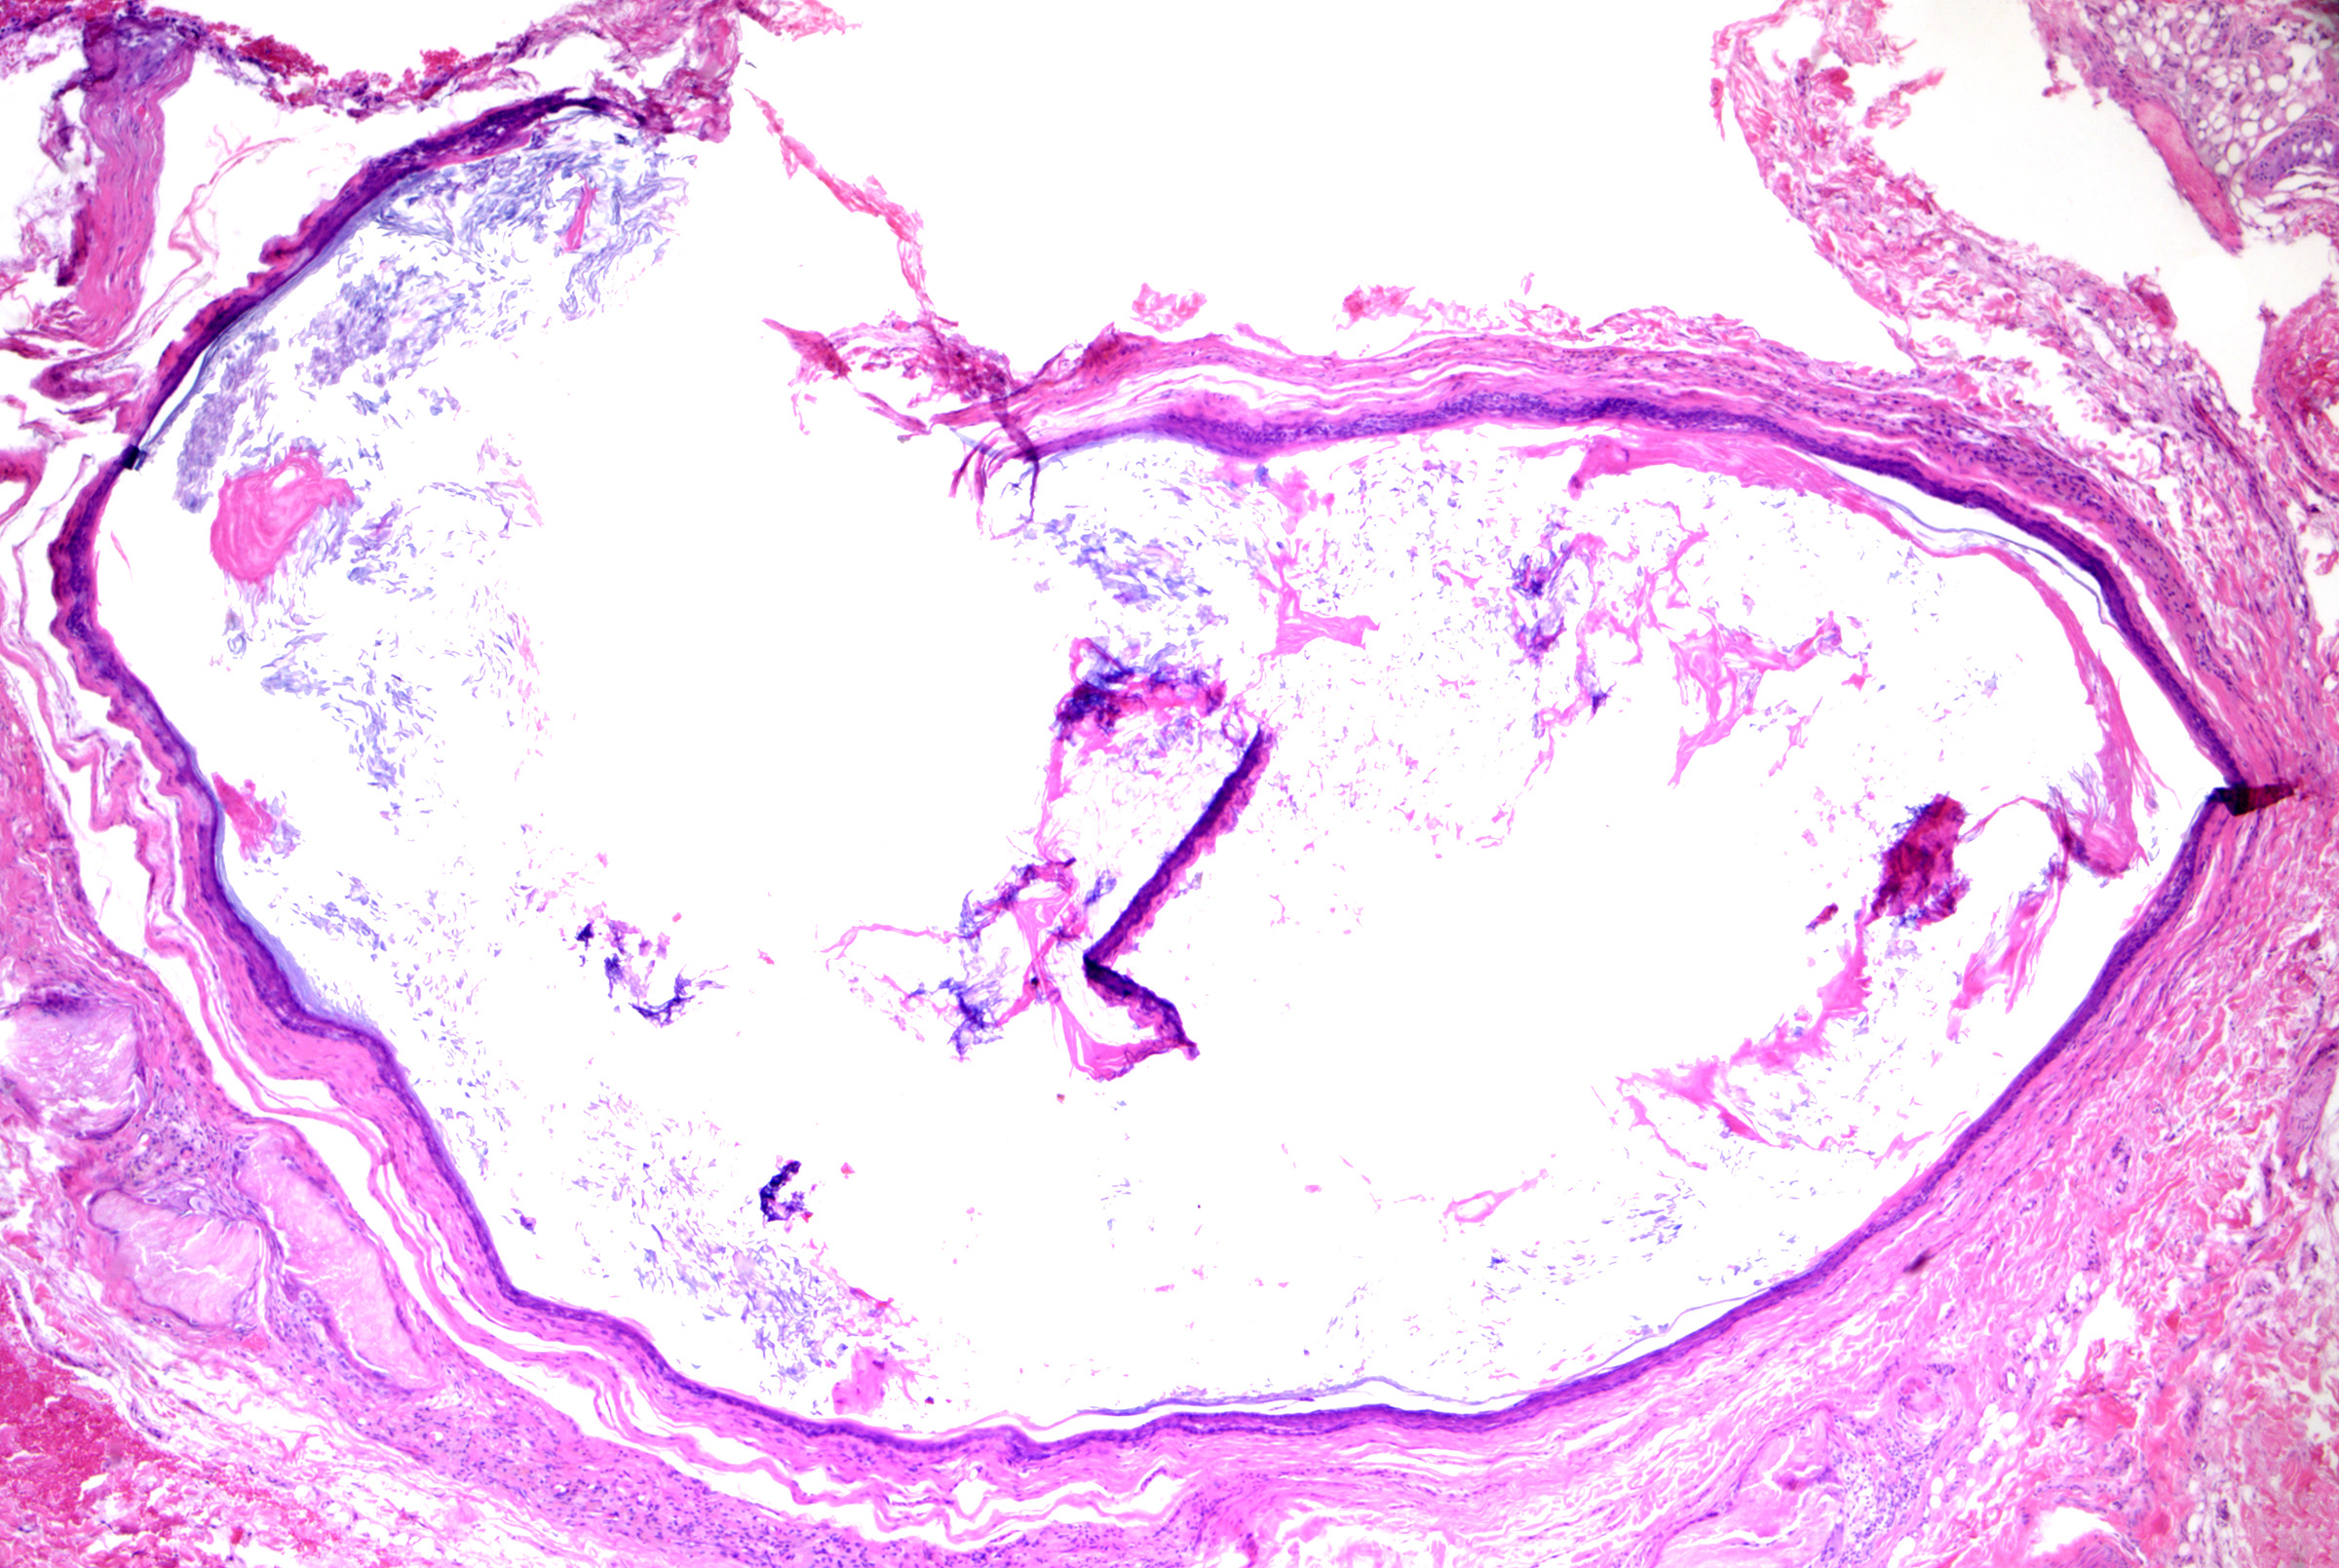 <p>Epidermoid Cyst. H&amp;E staining at 40x magnification.</p>